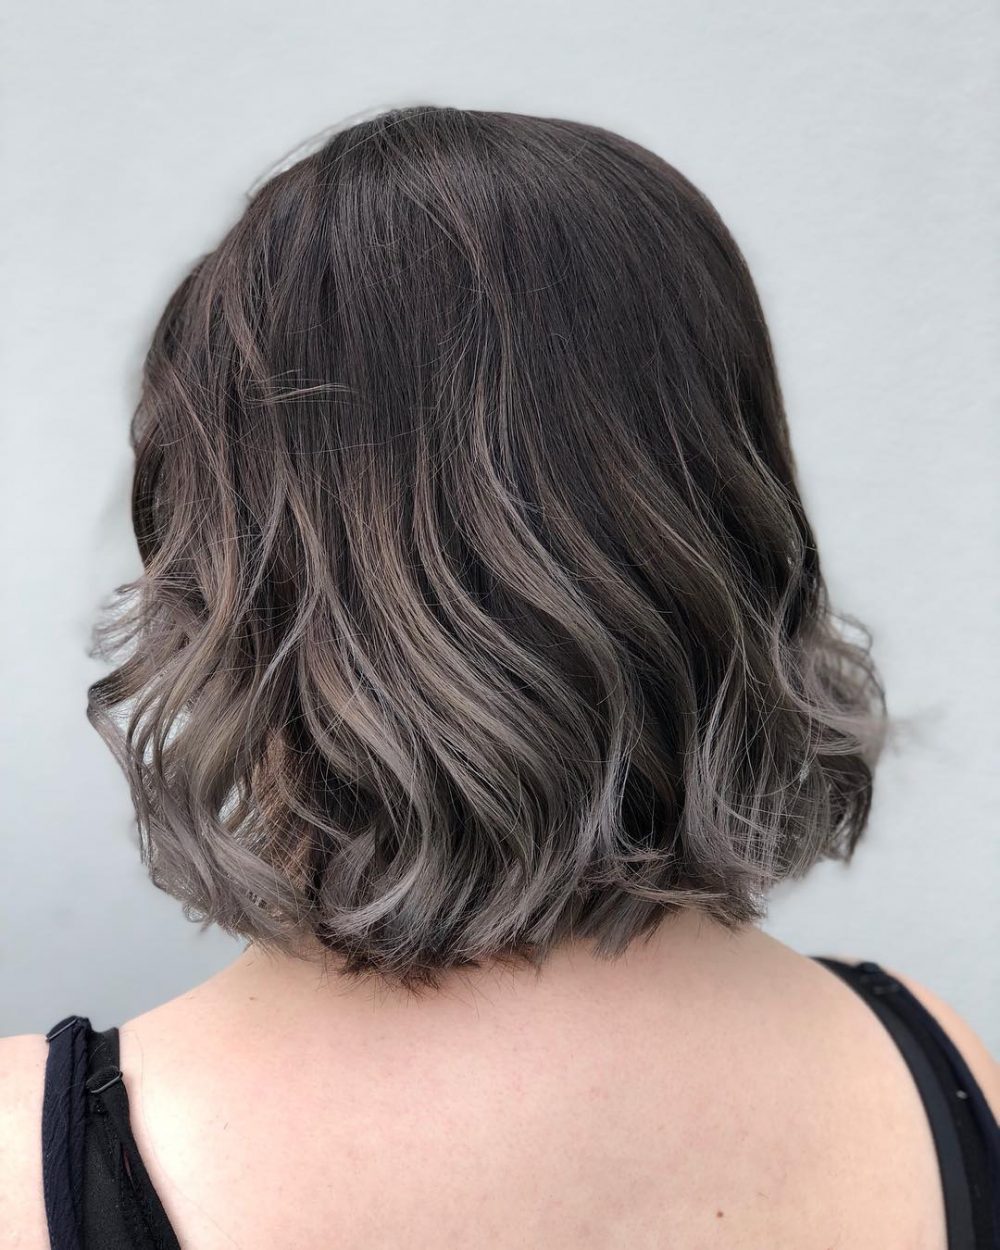 Short hairstyle with Dark Black to Metallic Ombre